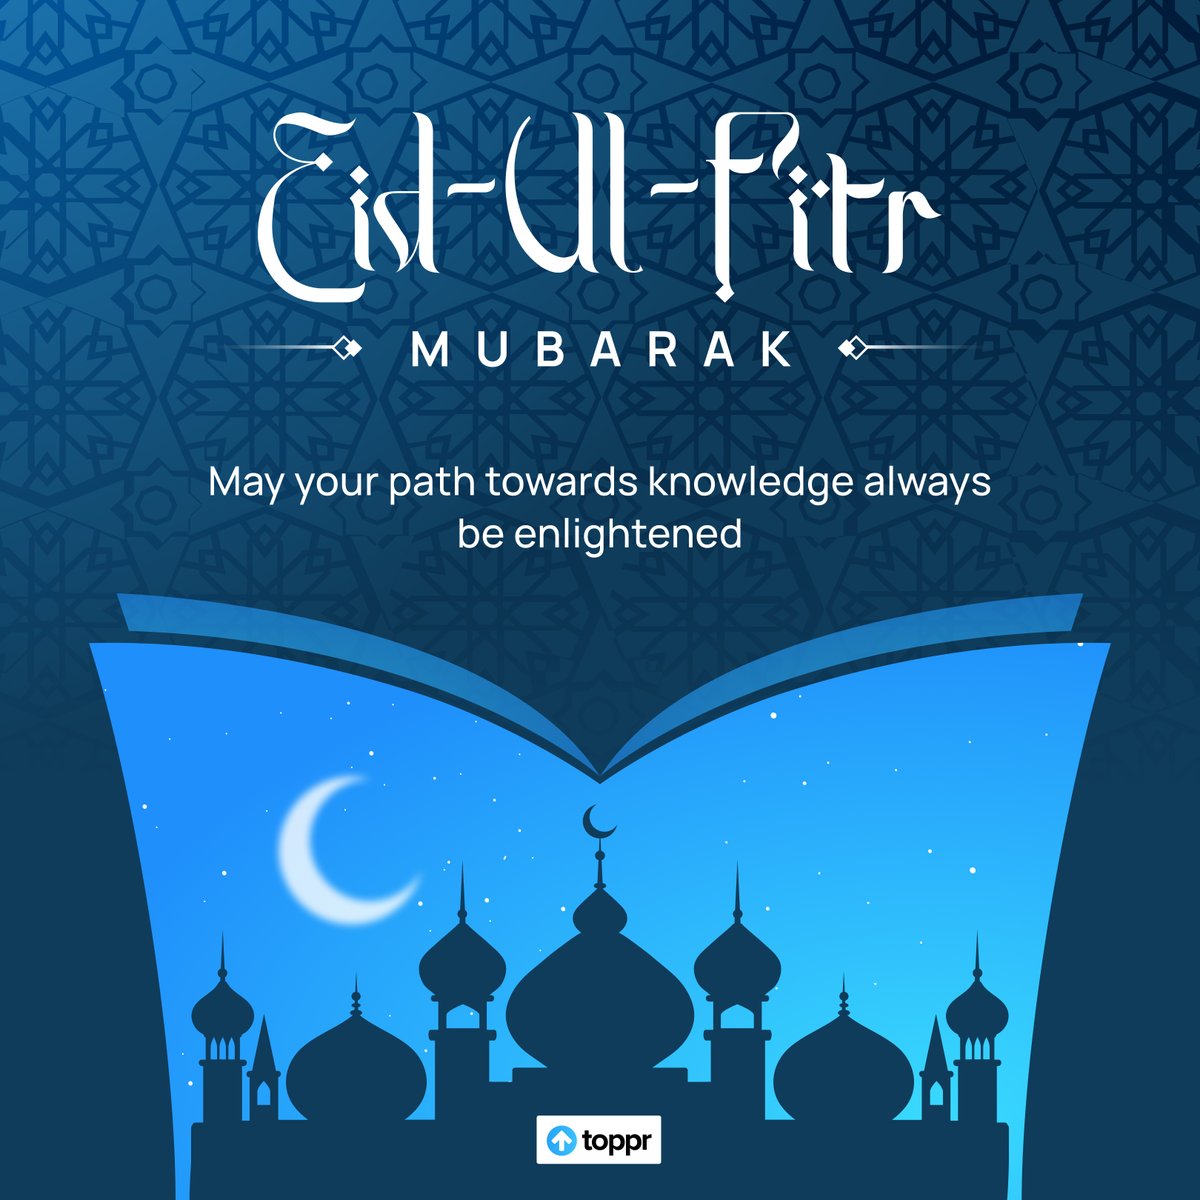 Toppr wishes you Eid-Ul-Fitr Mubarak! May you always shine bright with better results. 🌙✨ #EidAlFitr #EidUlFitr #EidMubarak2022 #Eidulfitr2022